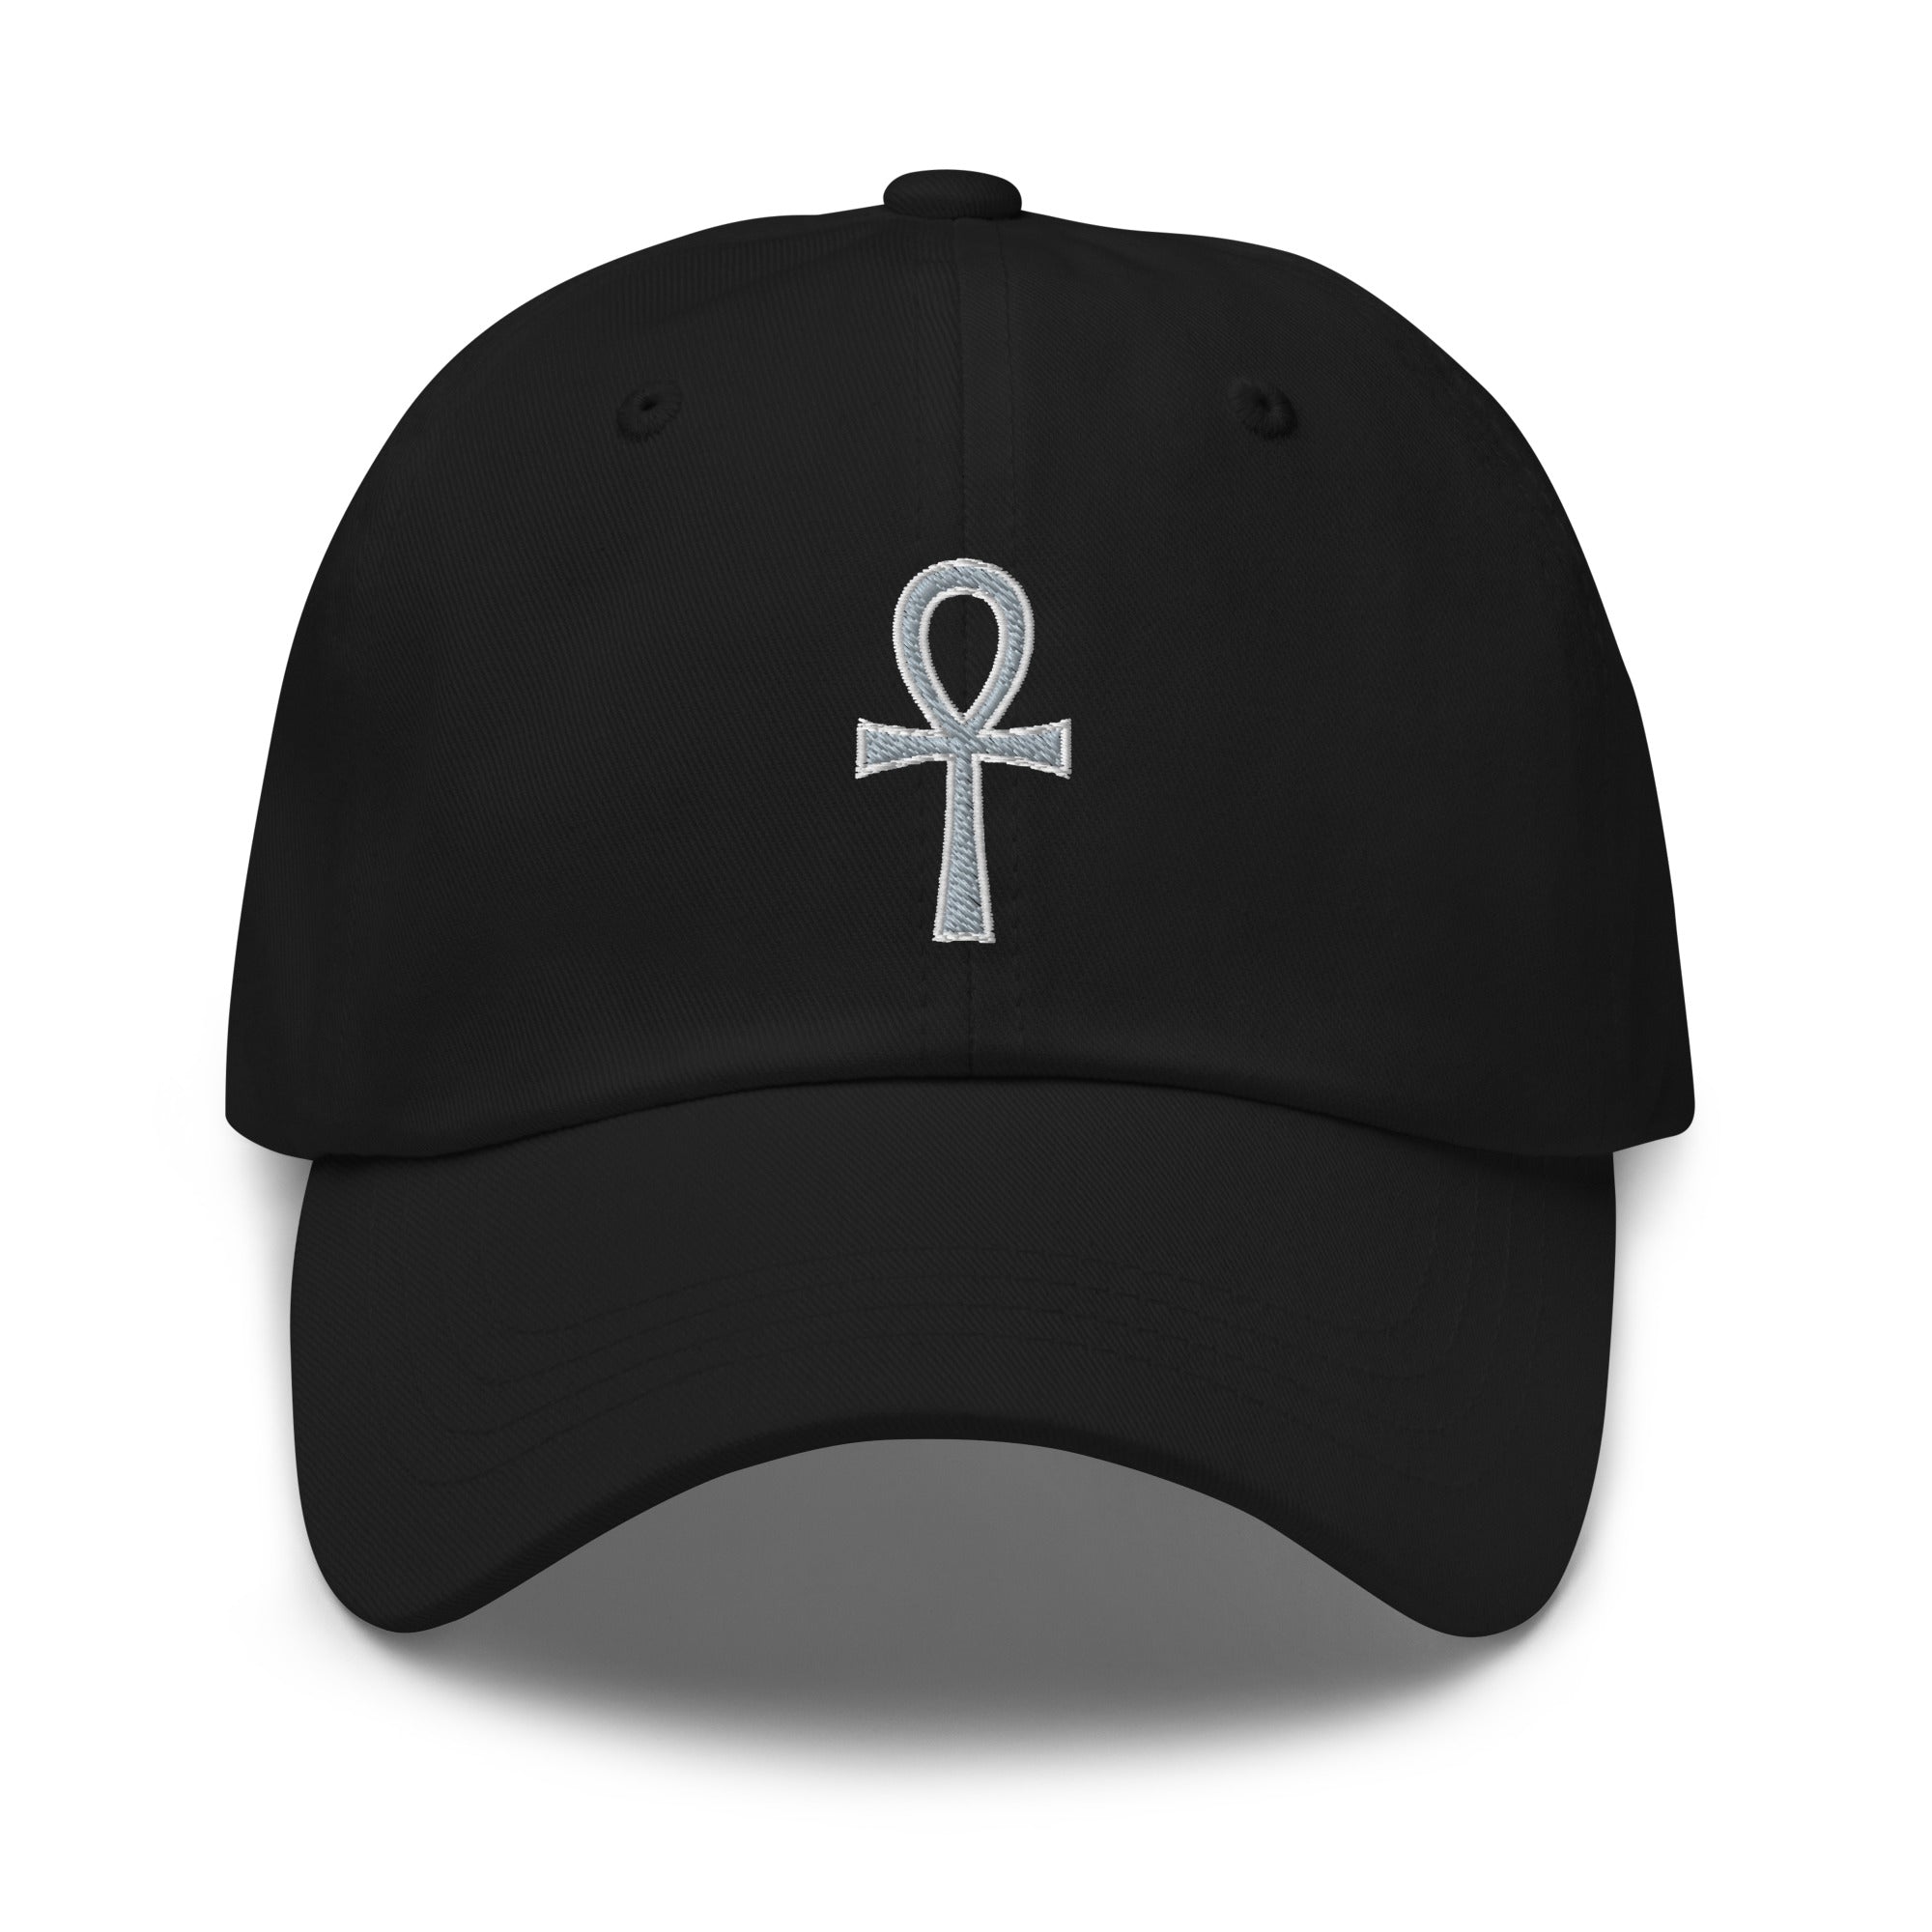 The Key of Life Ankh Ancient Egyptian Culture Embroidered Baseball Cap Dad hat Grey Thread - Edge of Life Designs